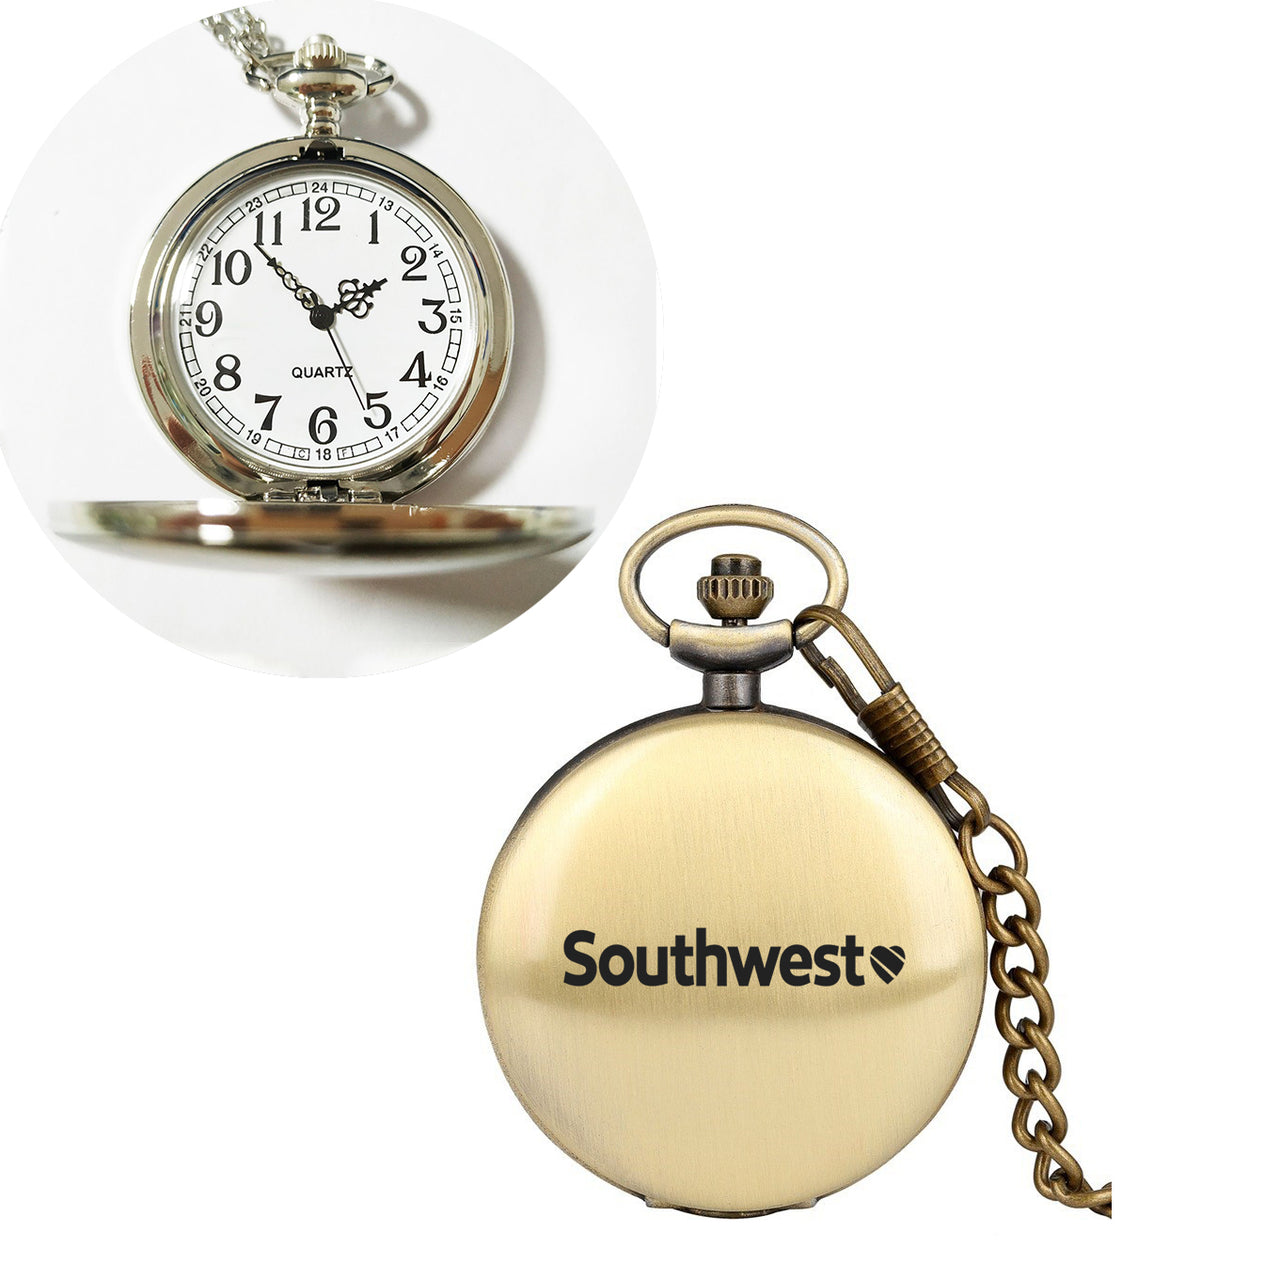 Southwest Airlines Designed Pocket Watches